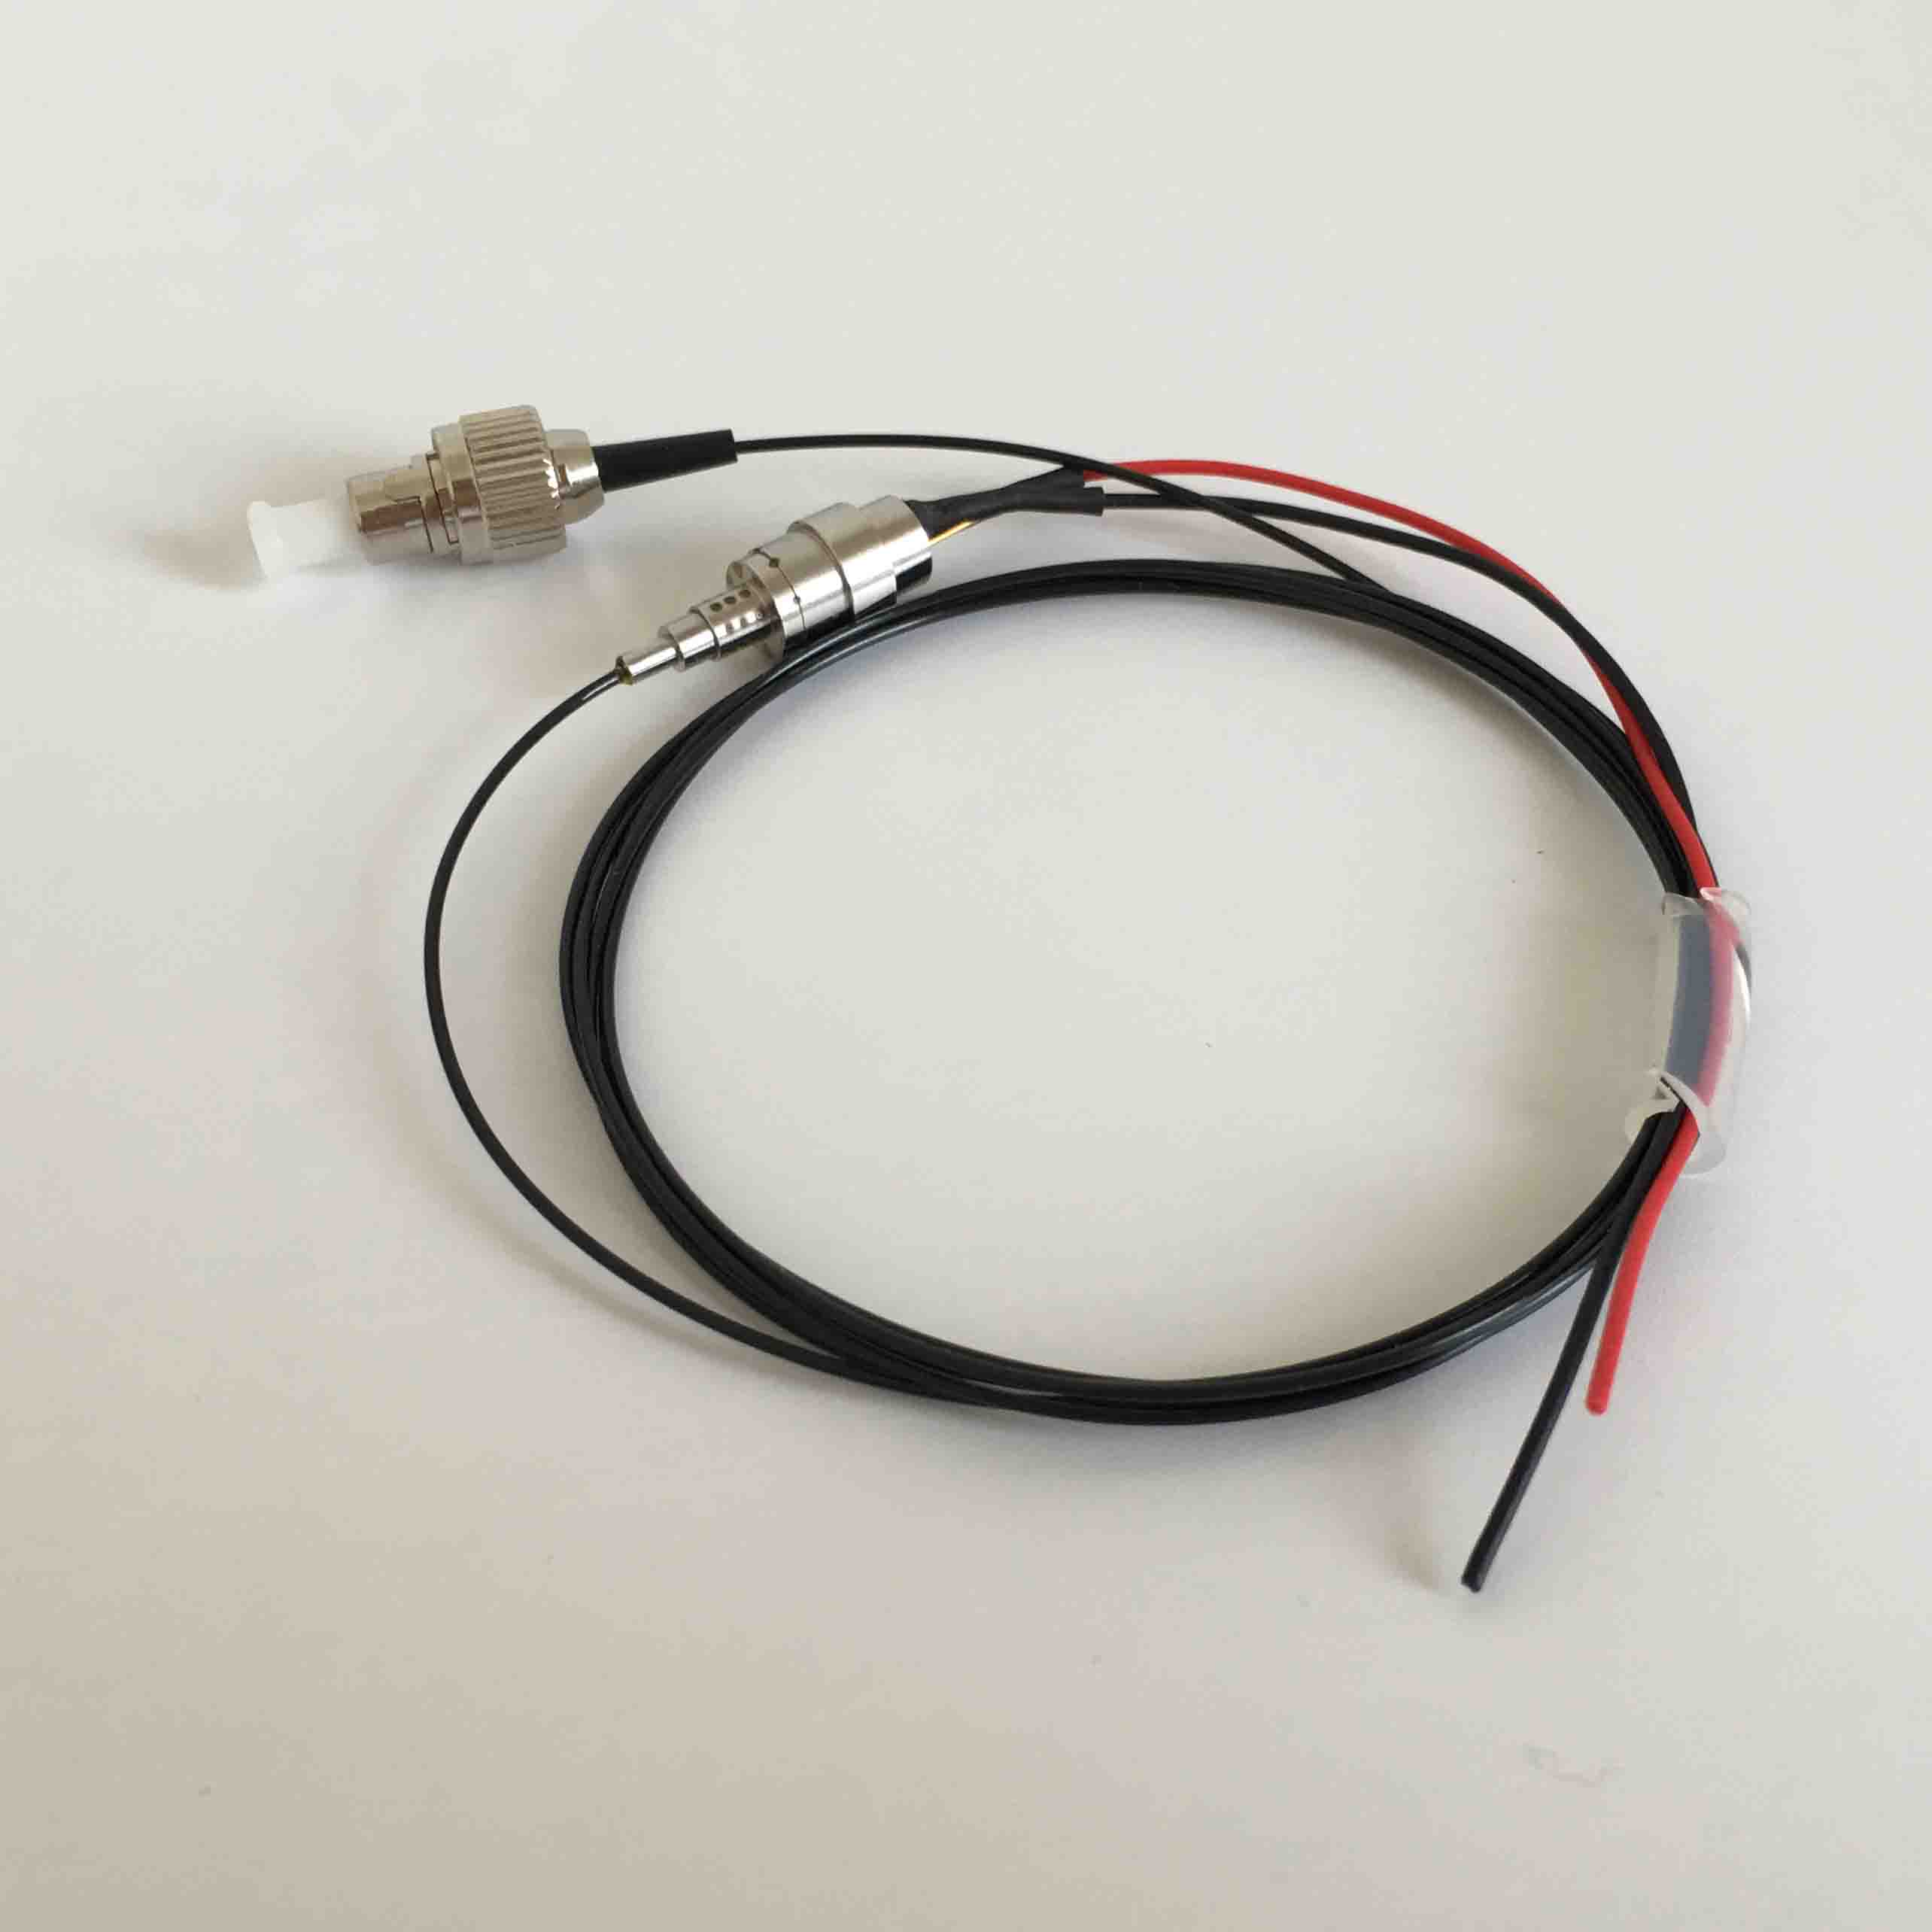 520nm 10mW 4um Singlemode Fiber Coupled Pigtailed Laser Diodes with FC Connector